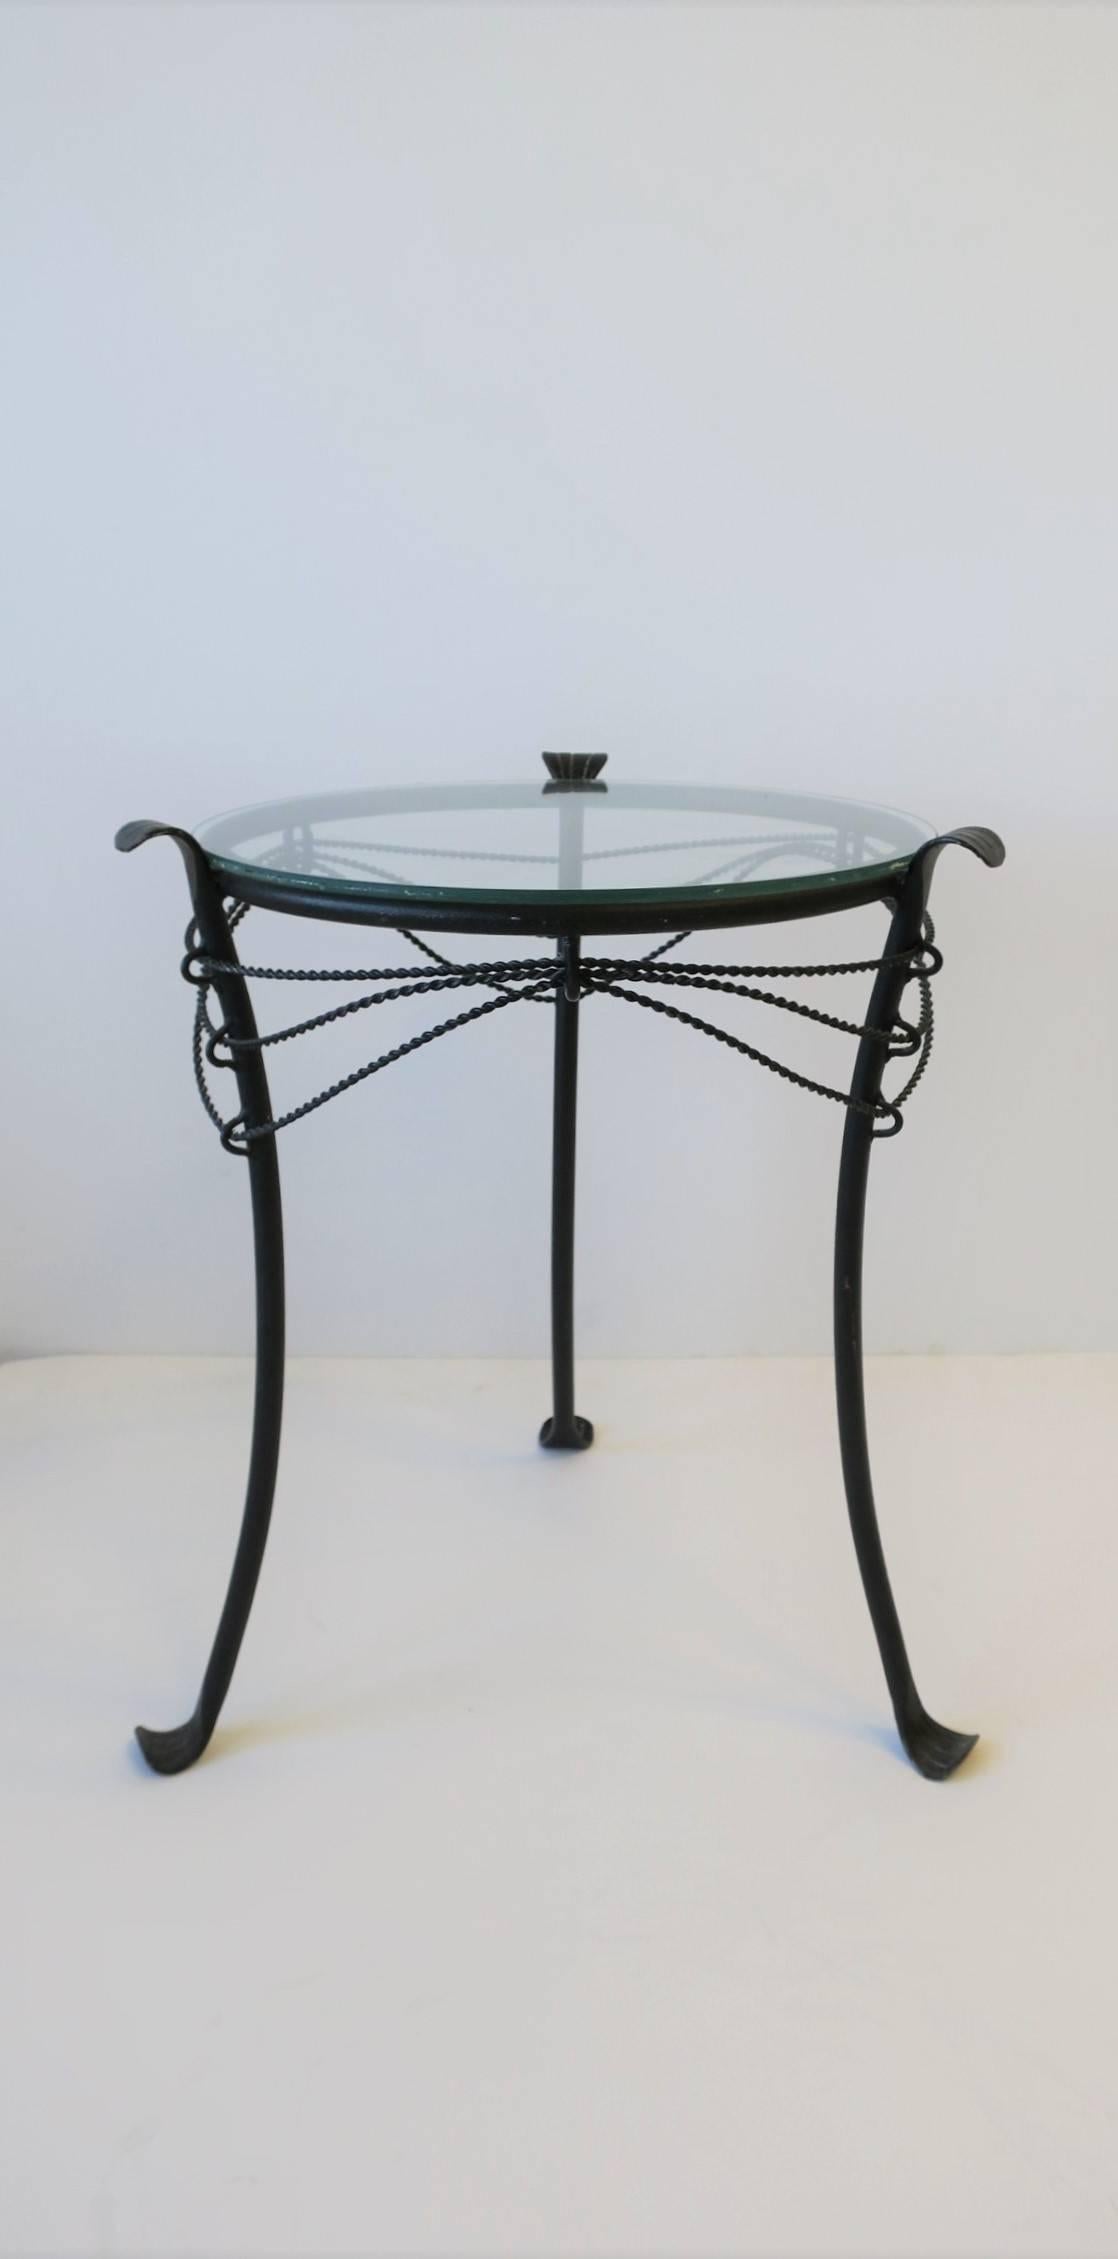 A petite or small Gueridon metal round side table with glass top. Piece can be used indoors or outdoors on a patio, porch, garden area, etc. Shown with two champagne glasses in image #4. 

Table measures:  12